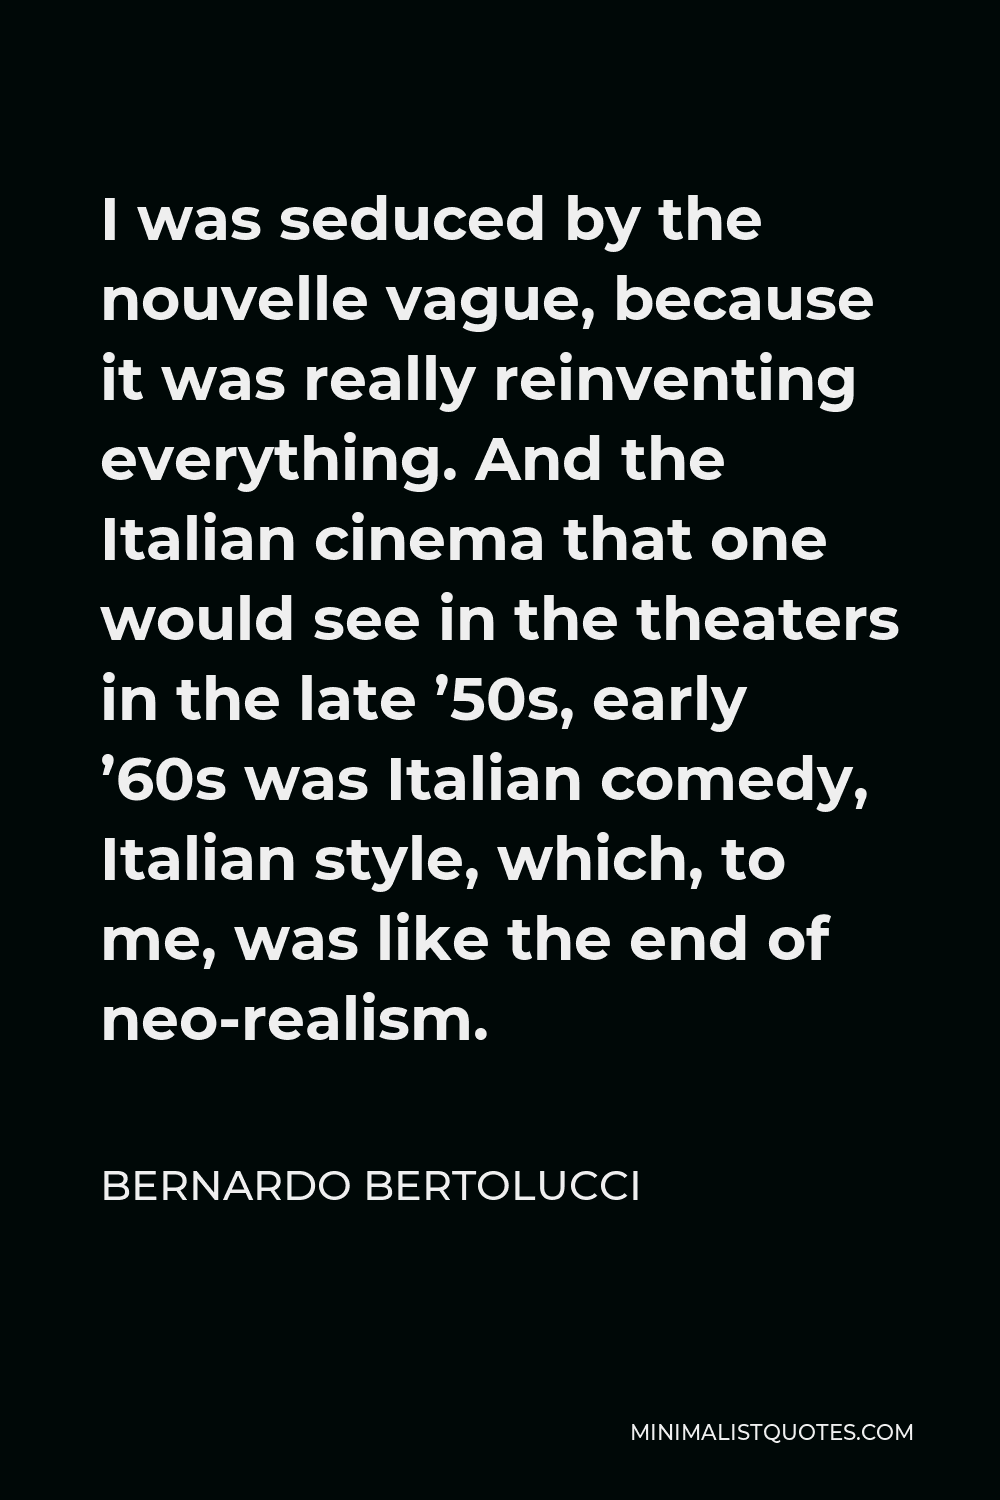 Bernardo Bertolucci Quote - I was seduced by the nouvelle vague, because it was really reinventing everything. And the Italian cinema that one would see in the theaters in the late ’50s, early ’60s was Italian comedy, Italian style, which, to me, was like the end of neo-realism.